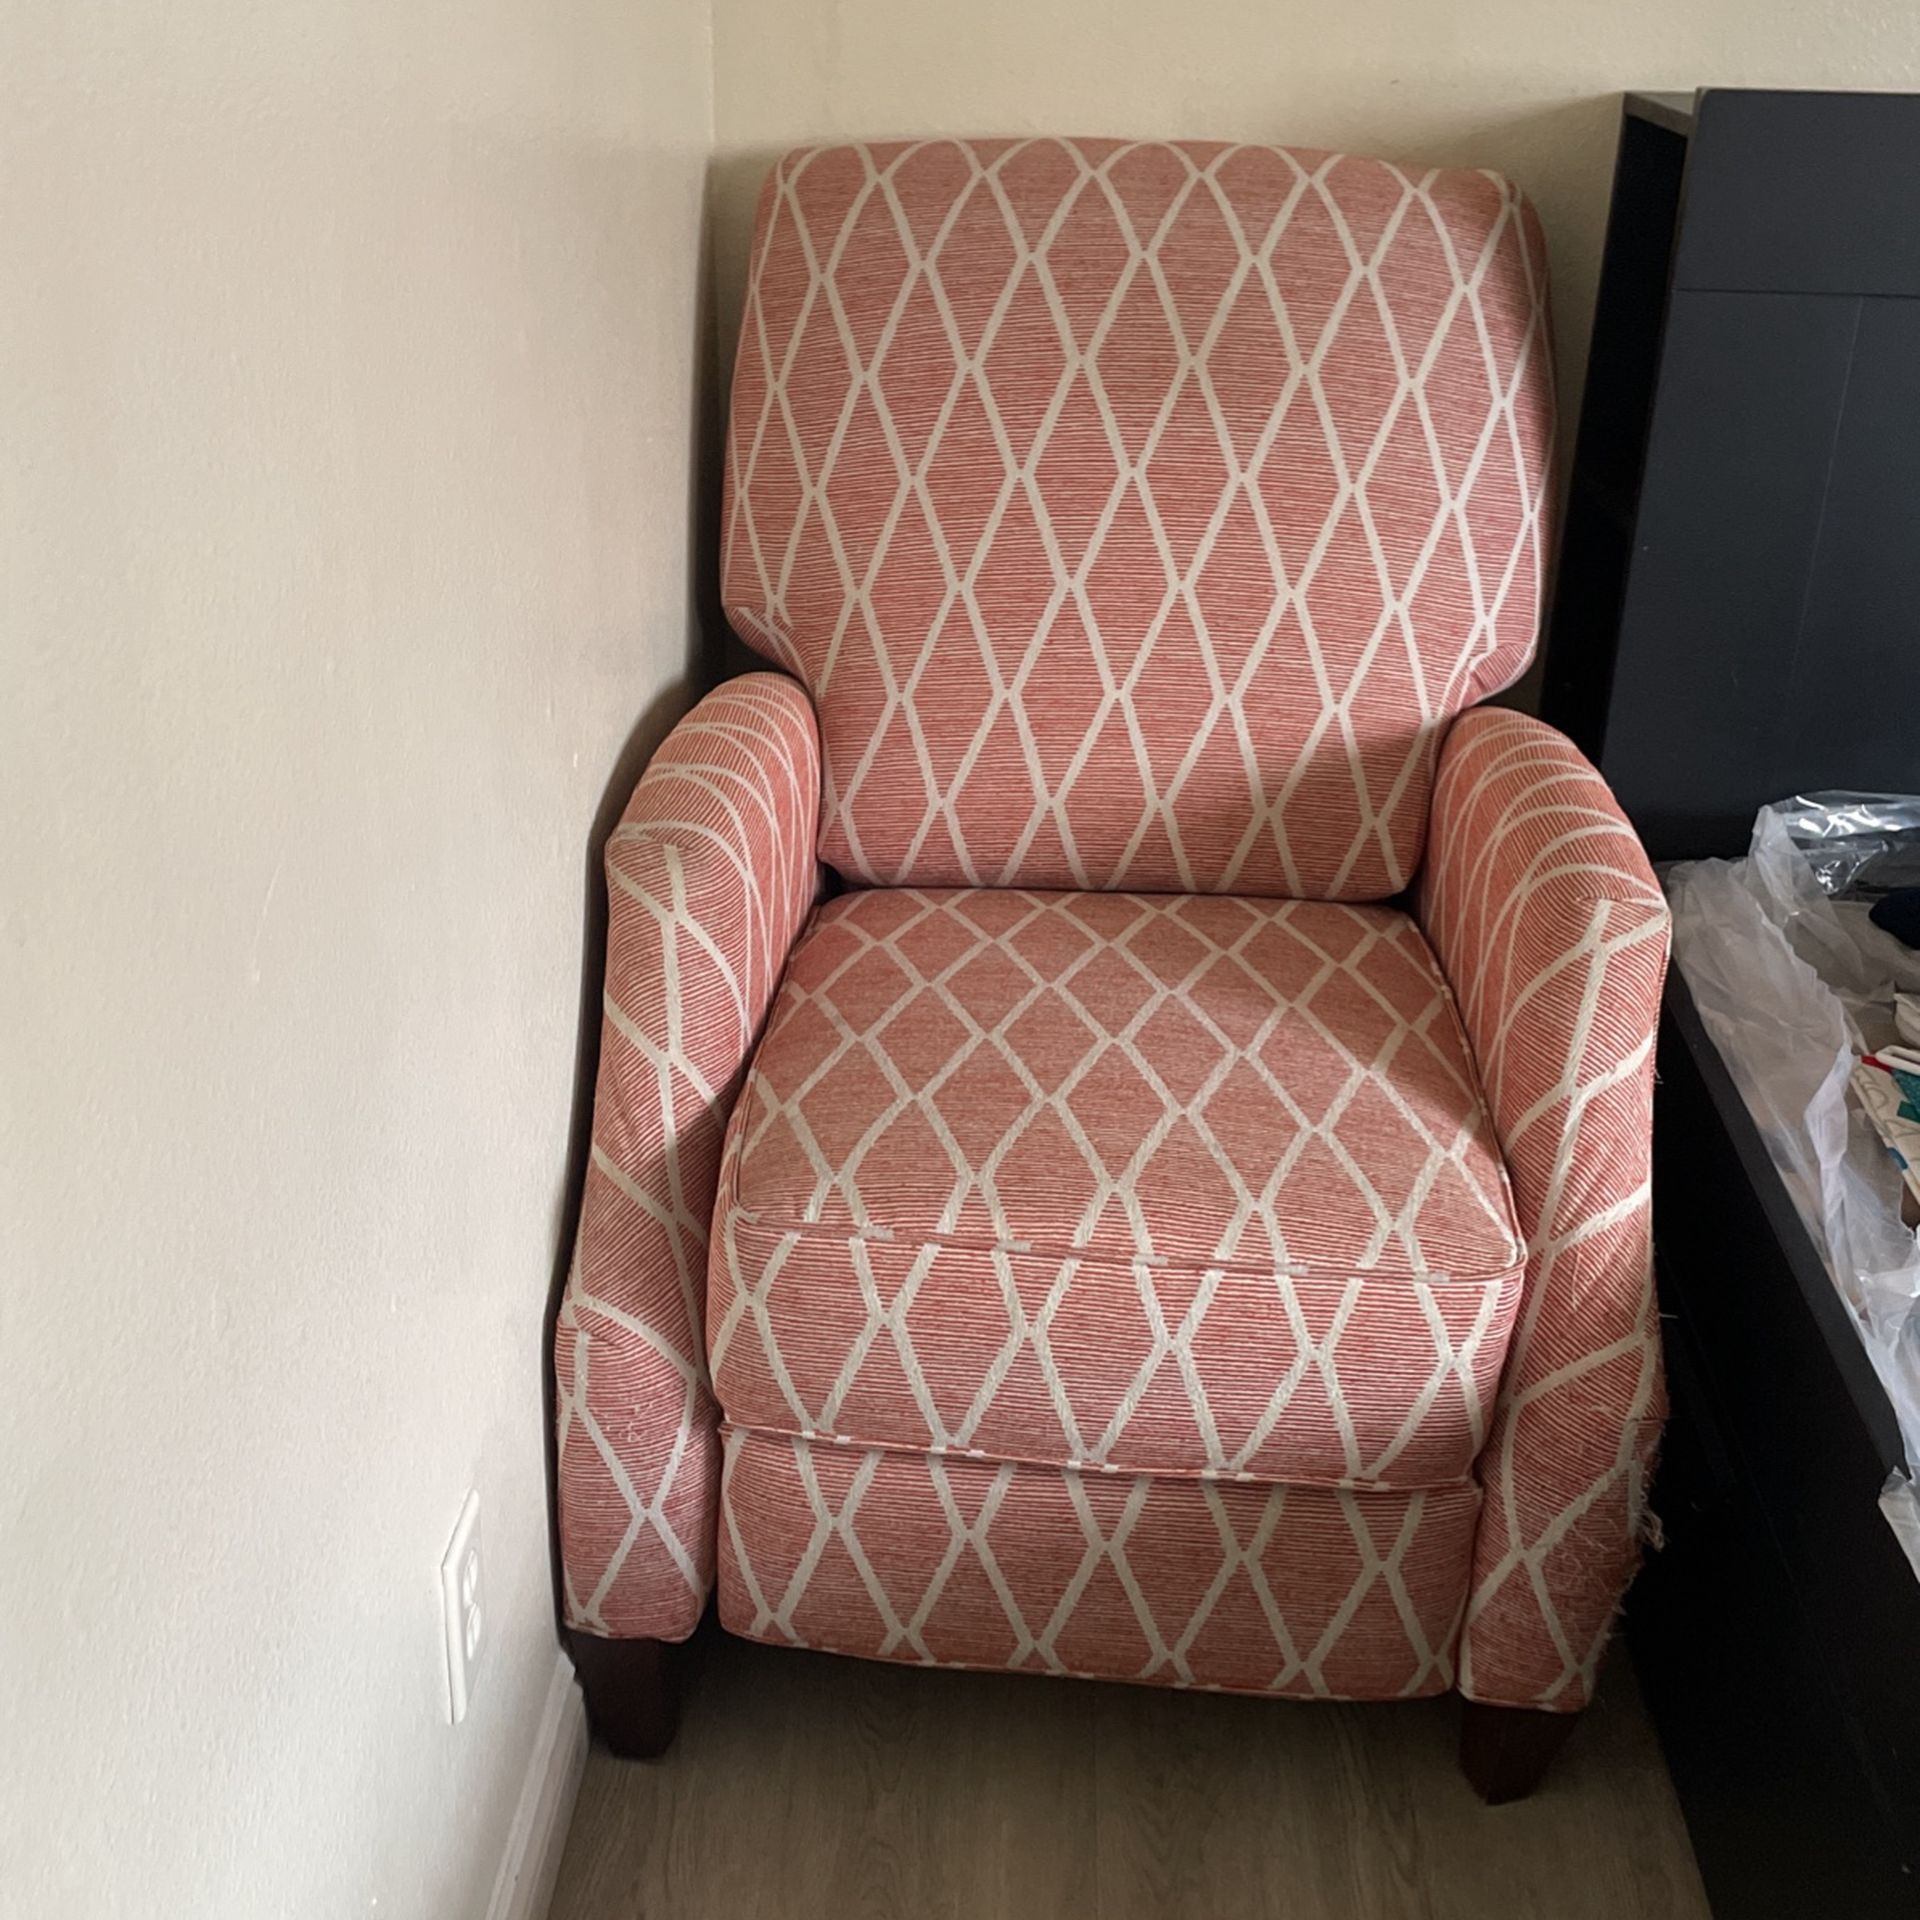 Free Recliner Chair 